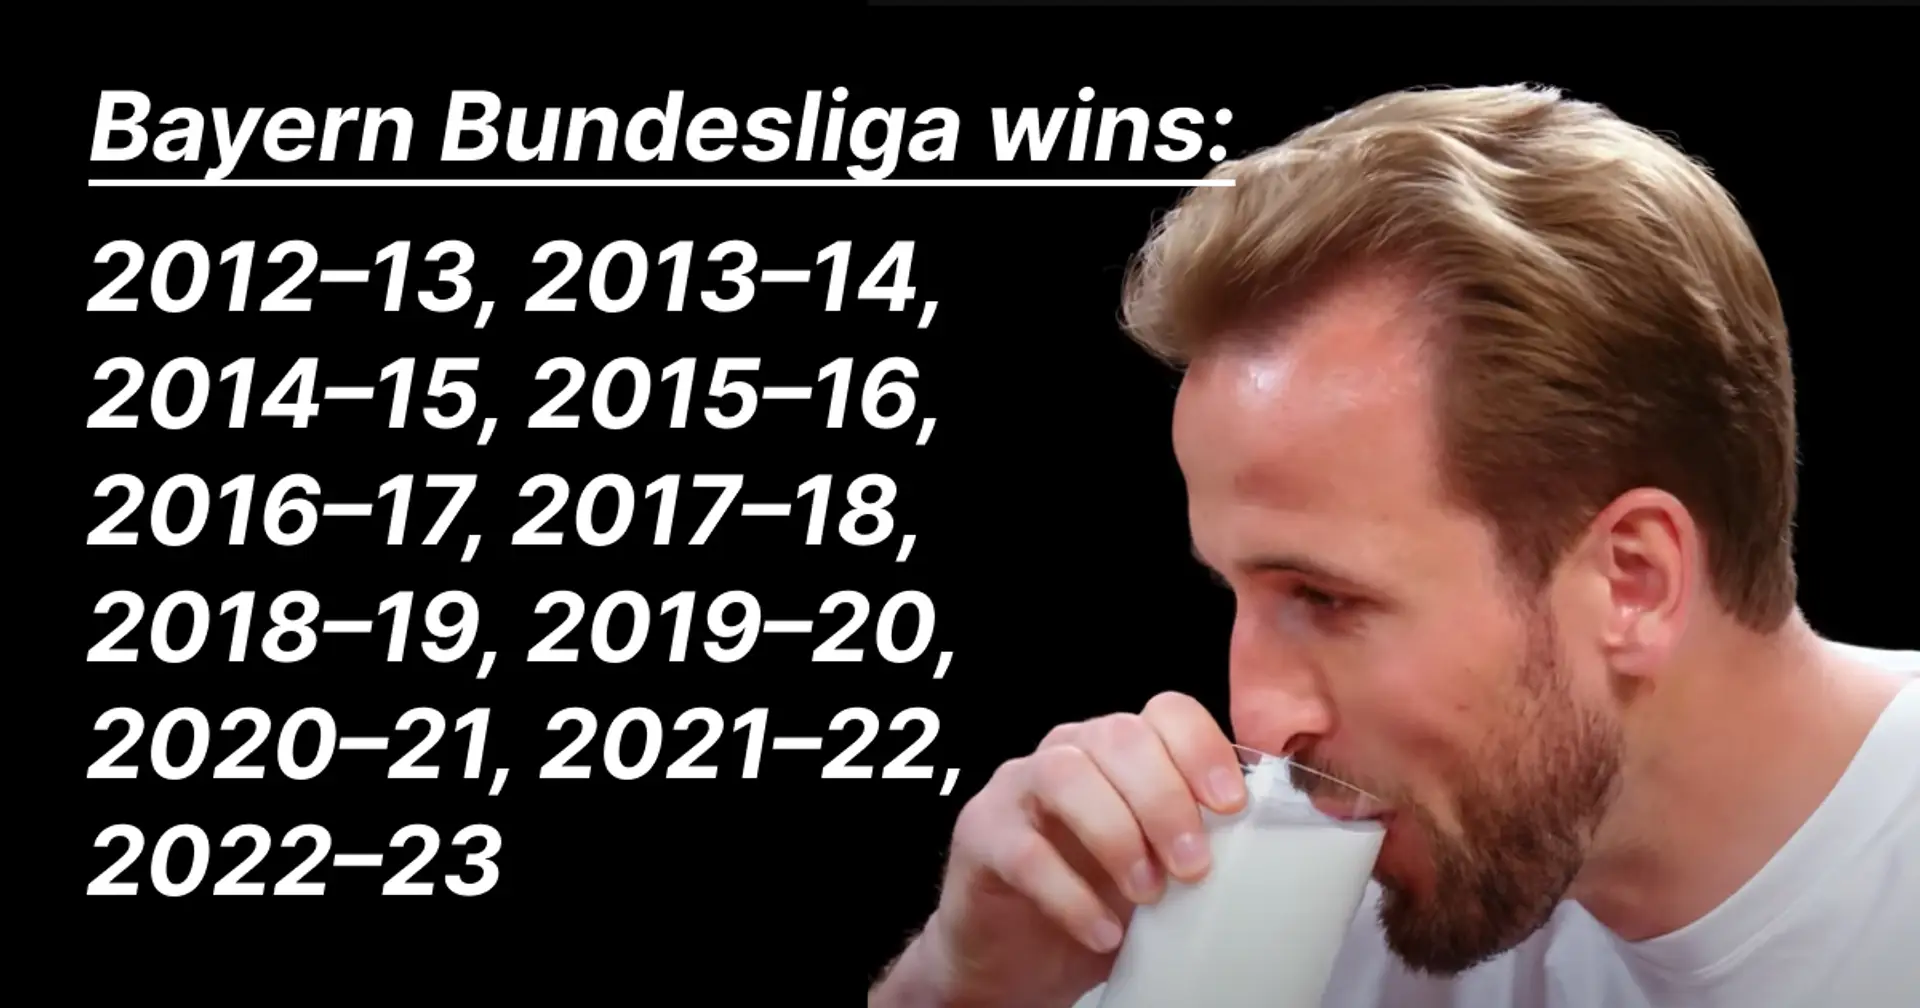 Why were Bayern so desperate to get Harry Kane if they win Bunedsliga even at their worst? Explained